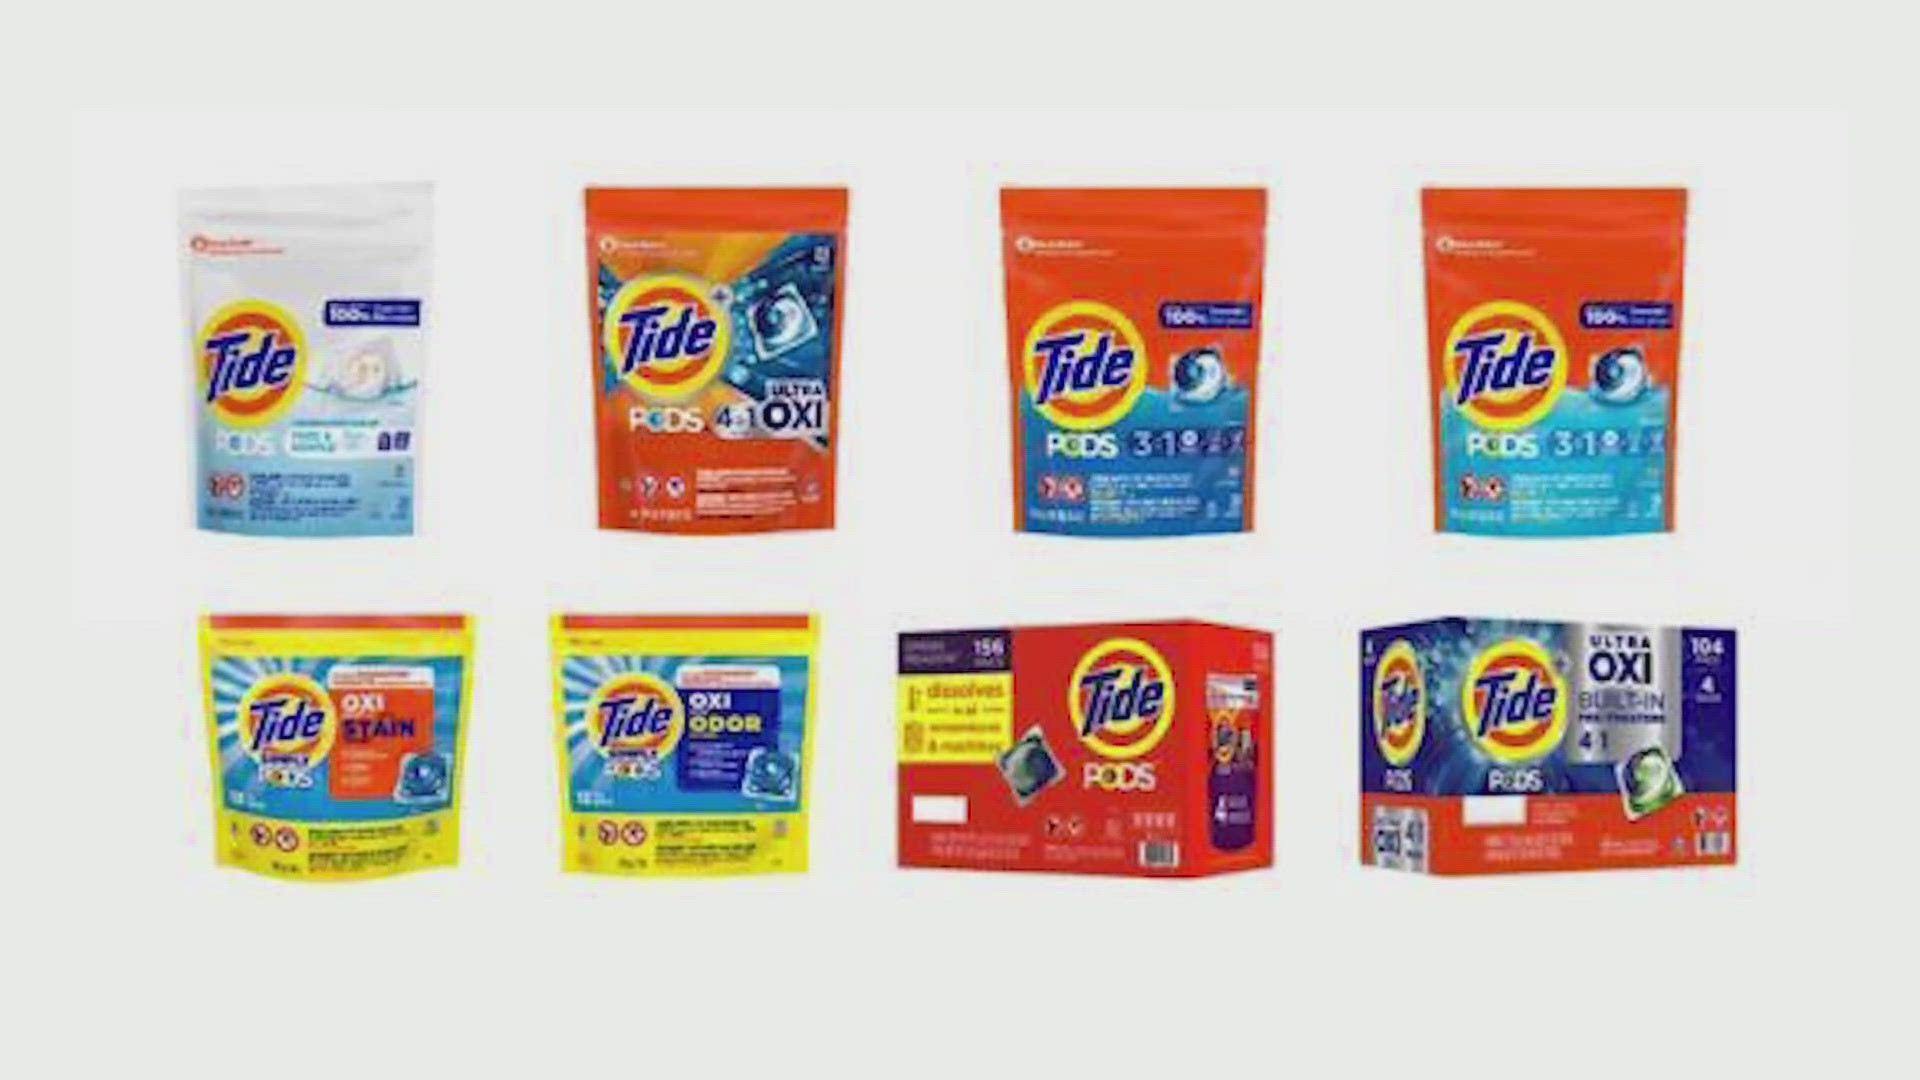 Millions of Laundry Soap Packs Recalled: What Families Need to Know About the Tide and Gain Alert